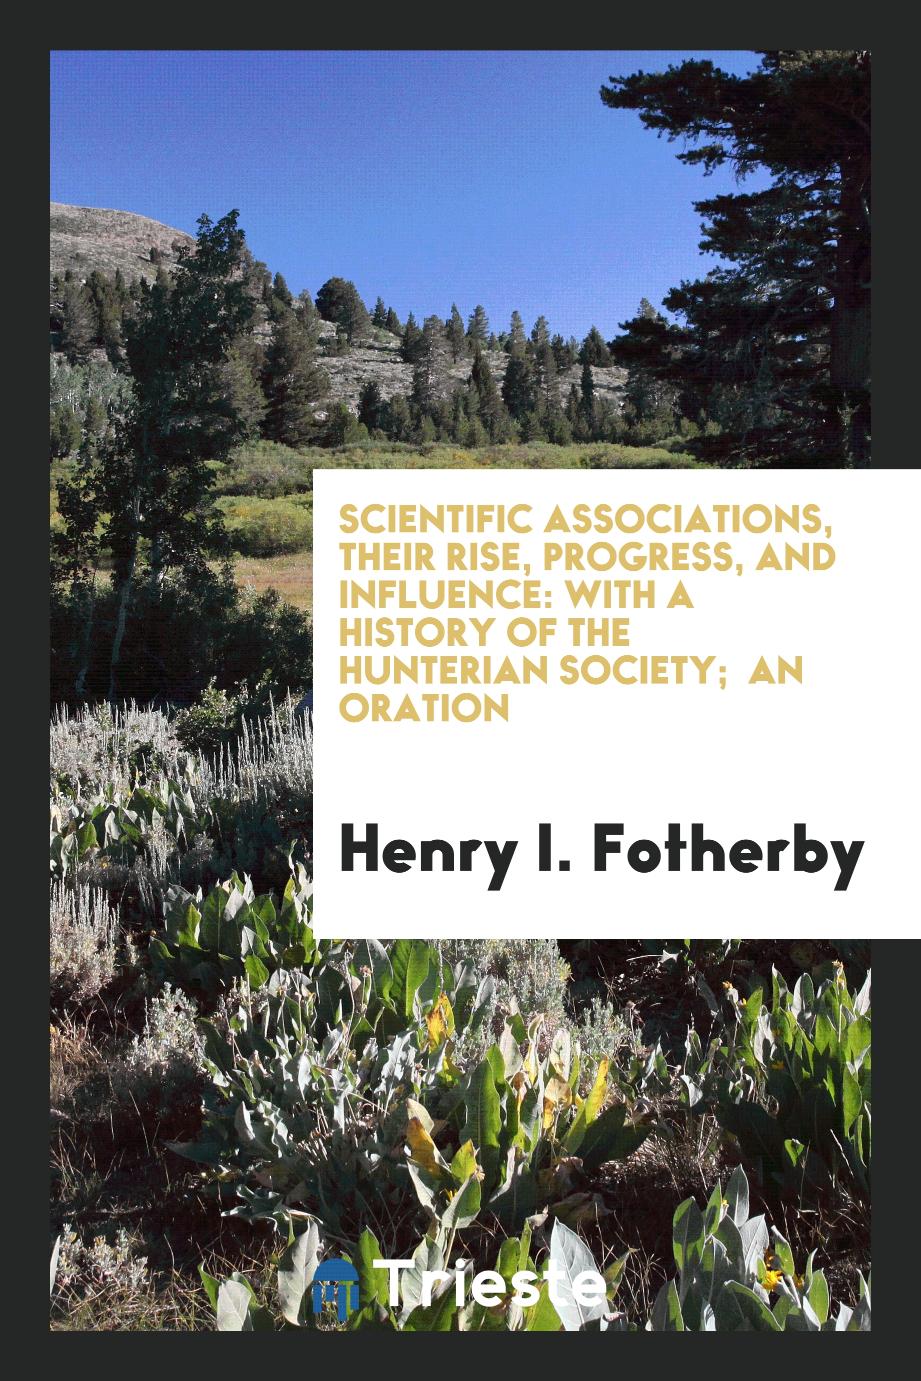 Scientific Associations, Their Rise, Progress, and Influence: With a History of the Hunterian Society; An Oration